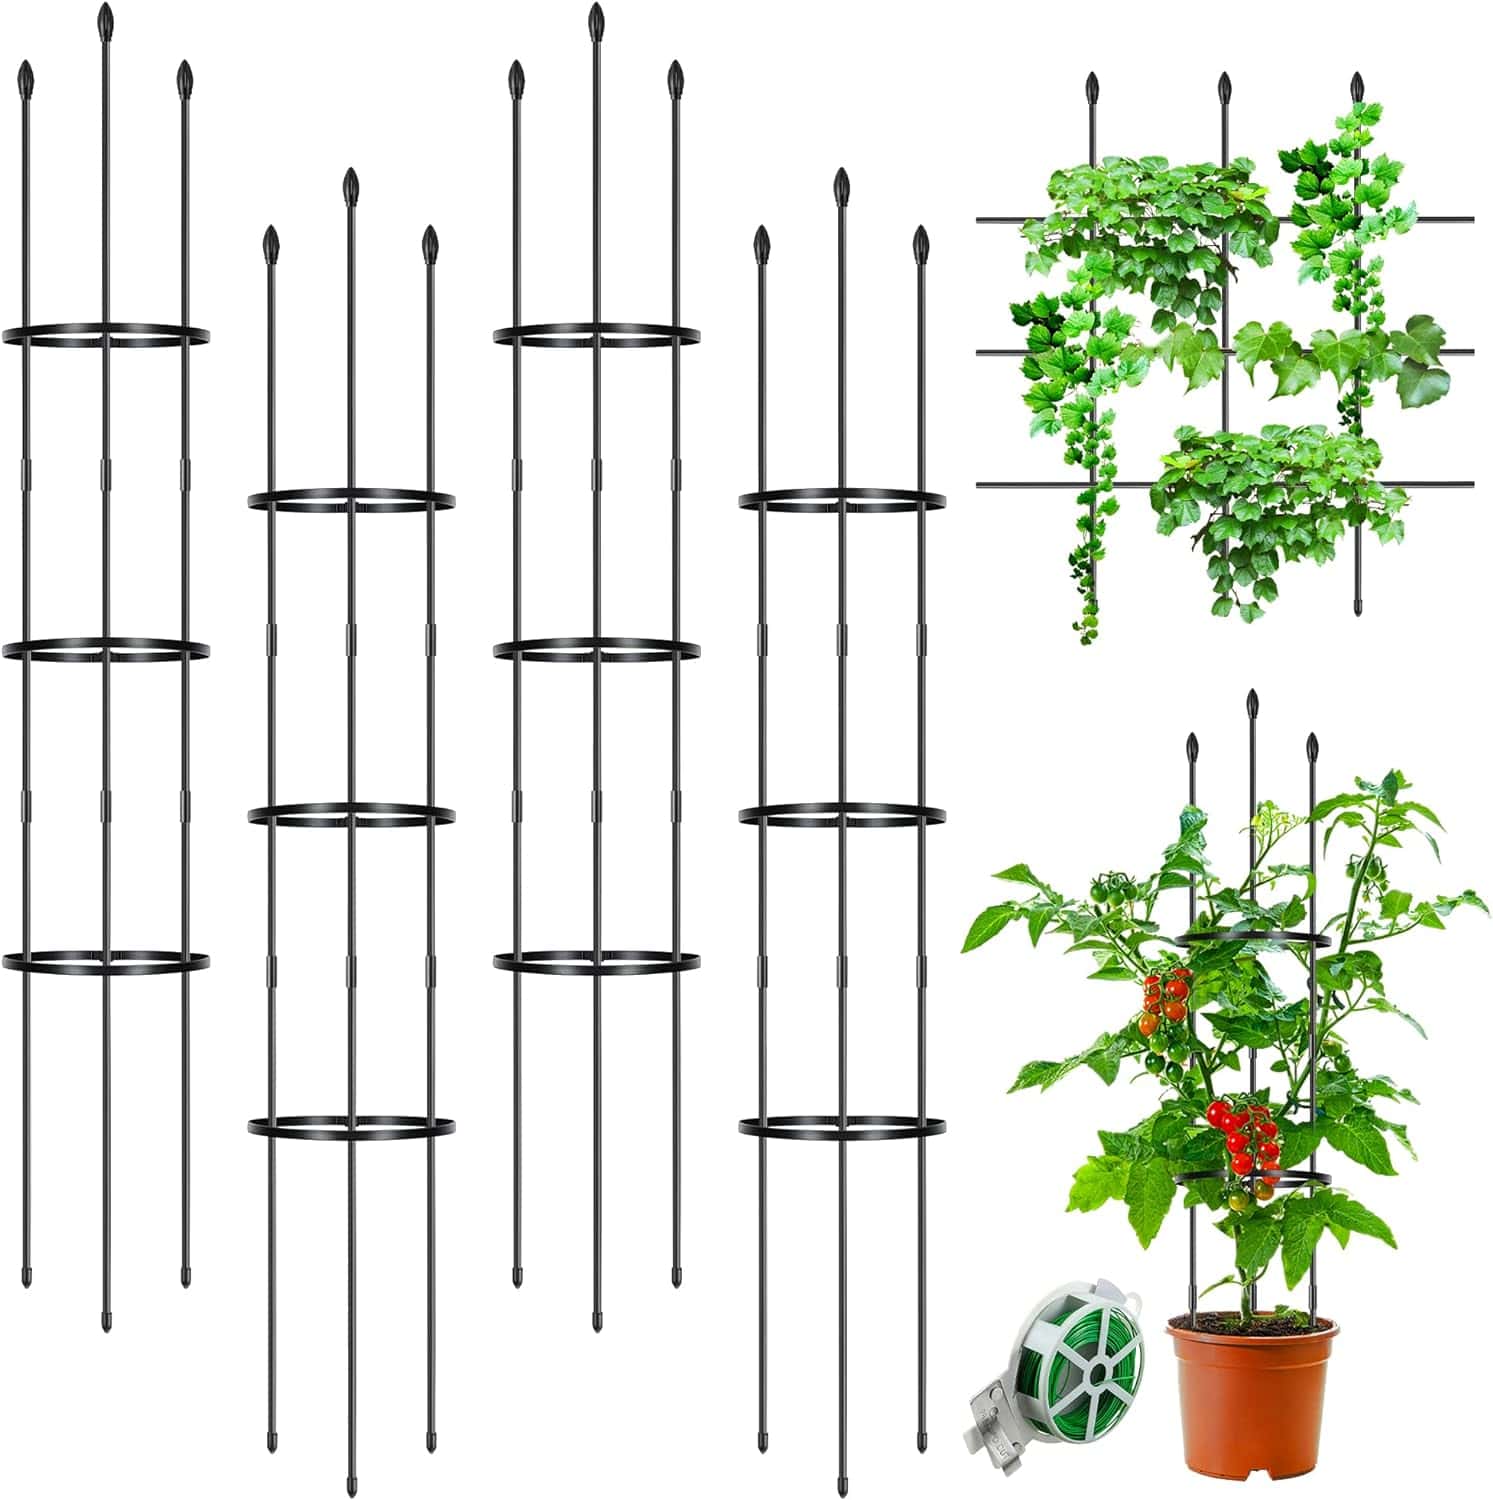 4 Pack Garden Trellis 2 in 1 Tomato Cages, 4 Feet Tomato Plant Support Trellis, Adjustable Plant Cage up to 48 Inch, Trellis for Potted Plants